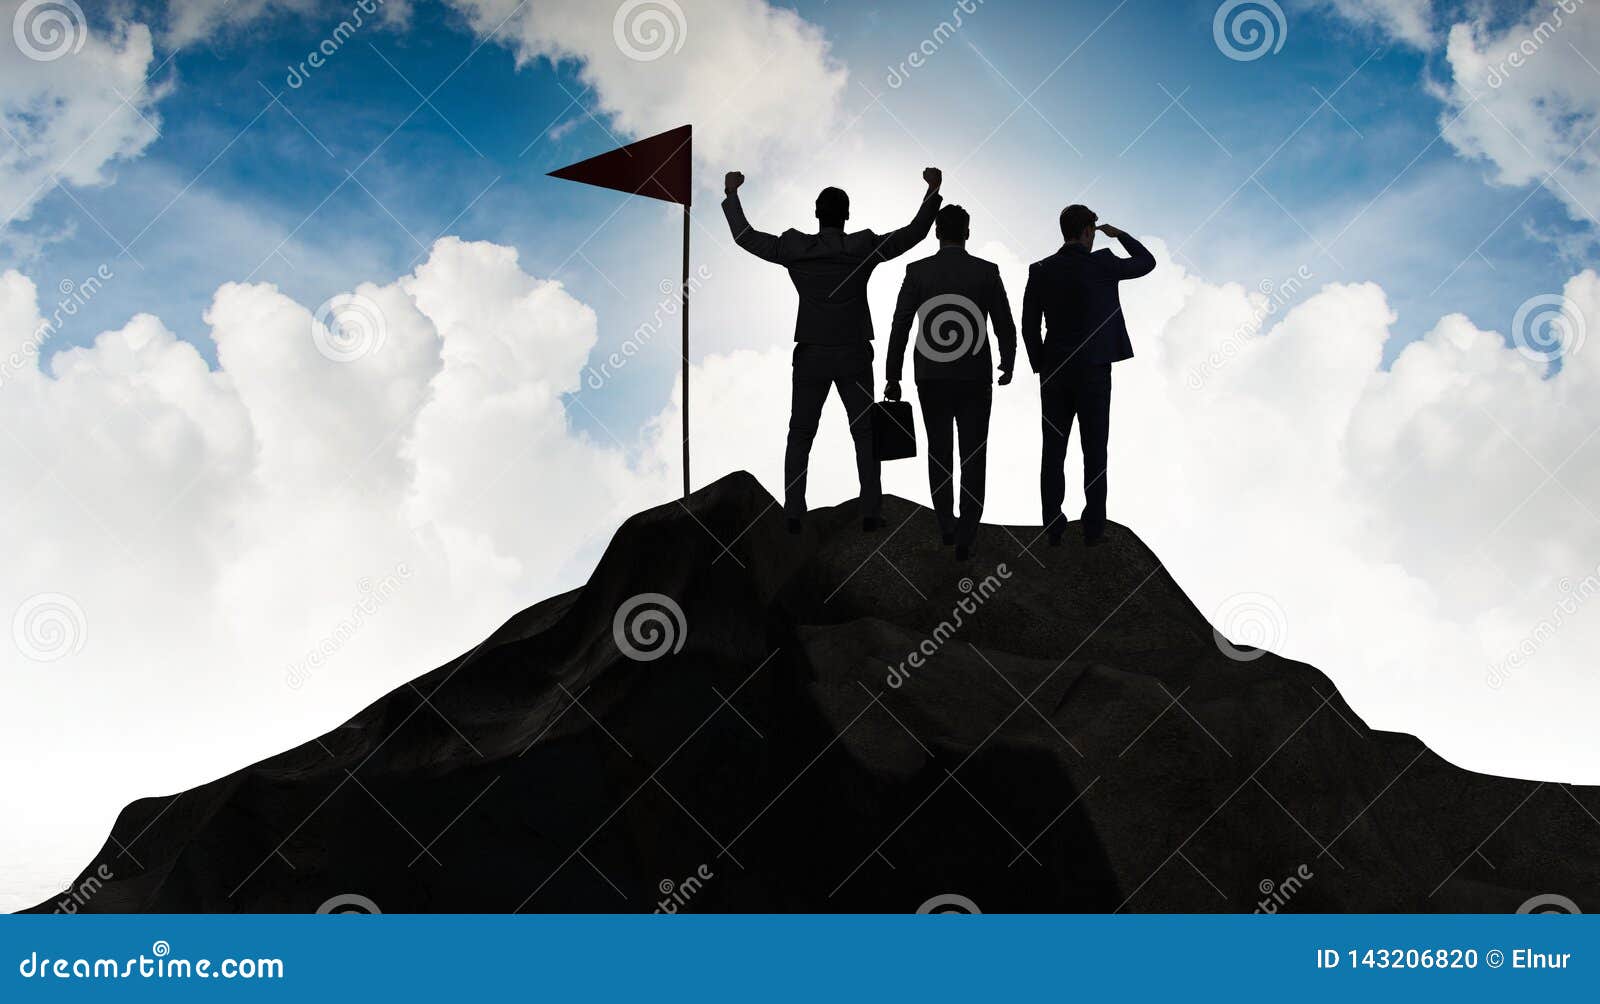 The Businessmen in Achievement and Teamwork Concept Stock Photo - Image ...